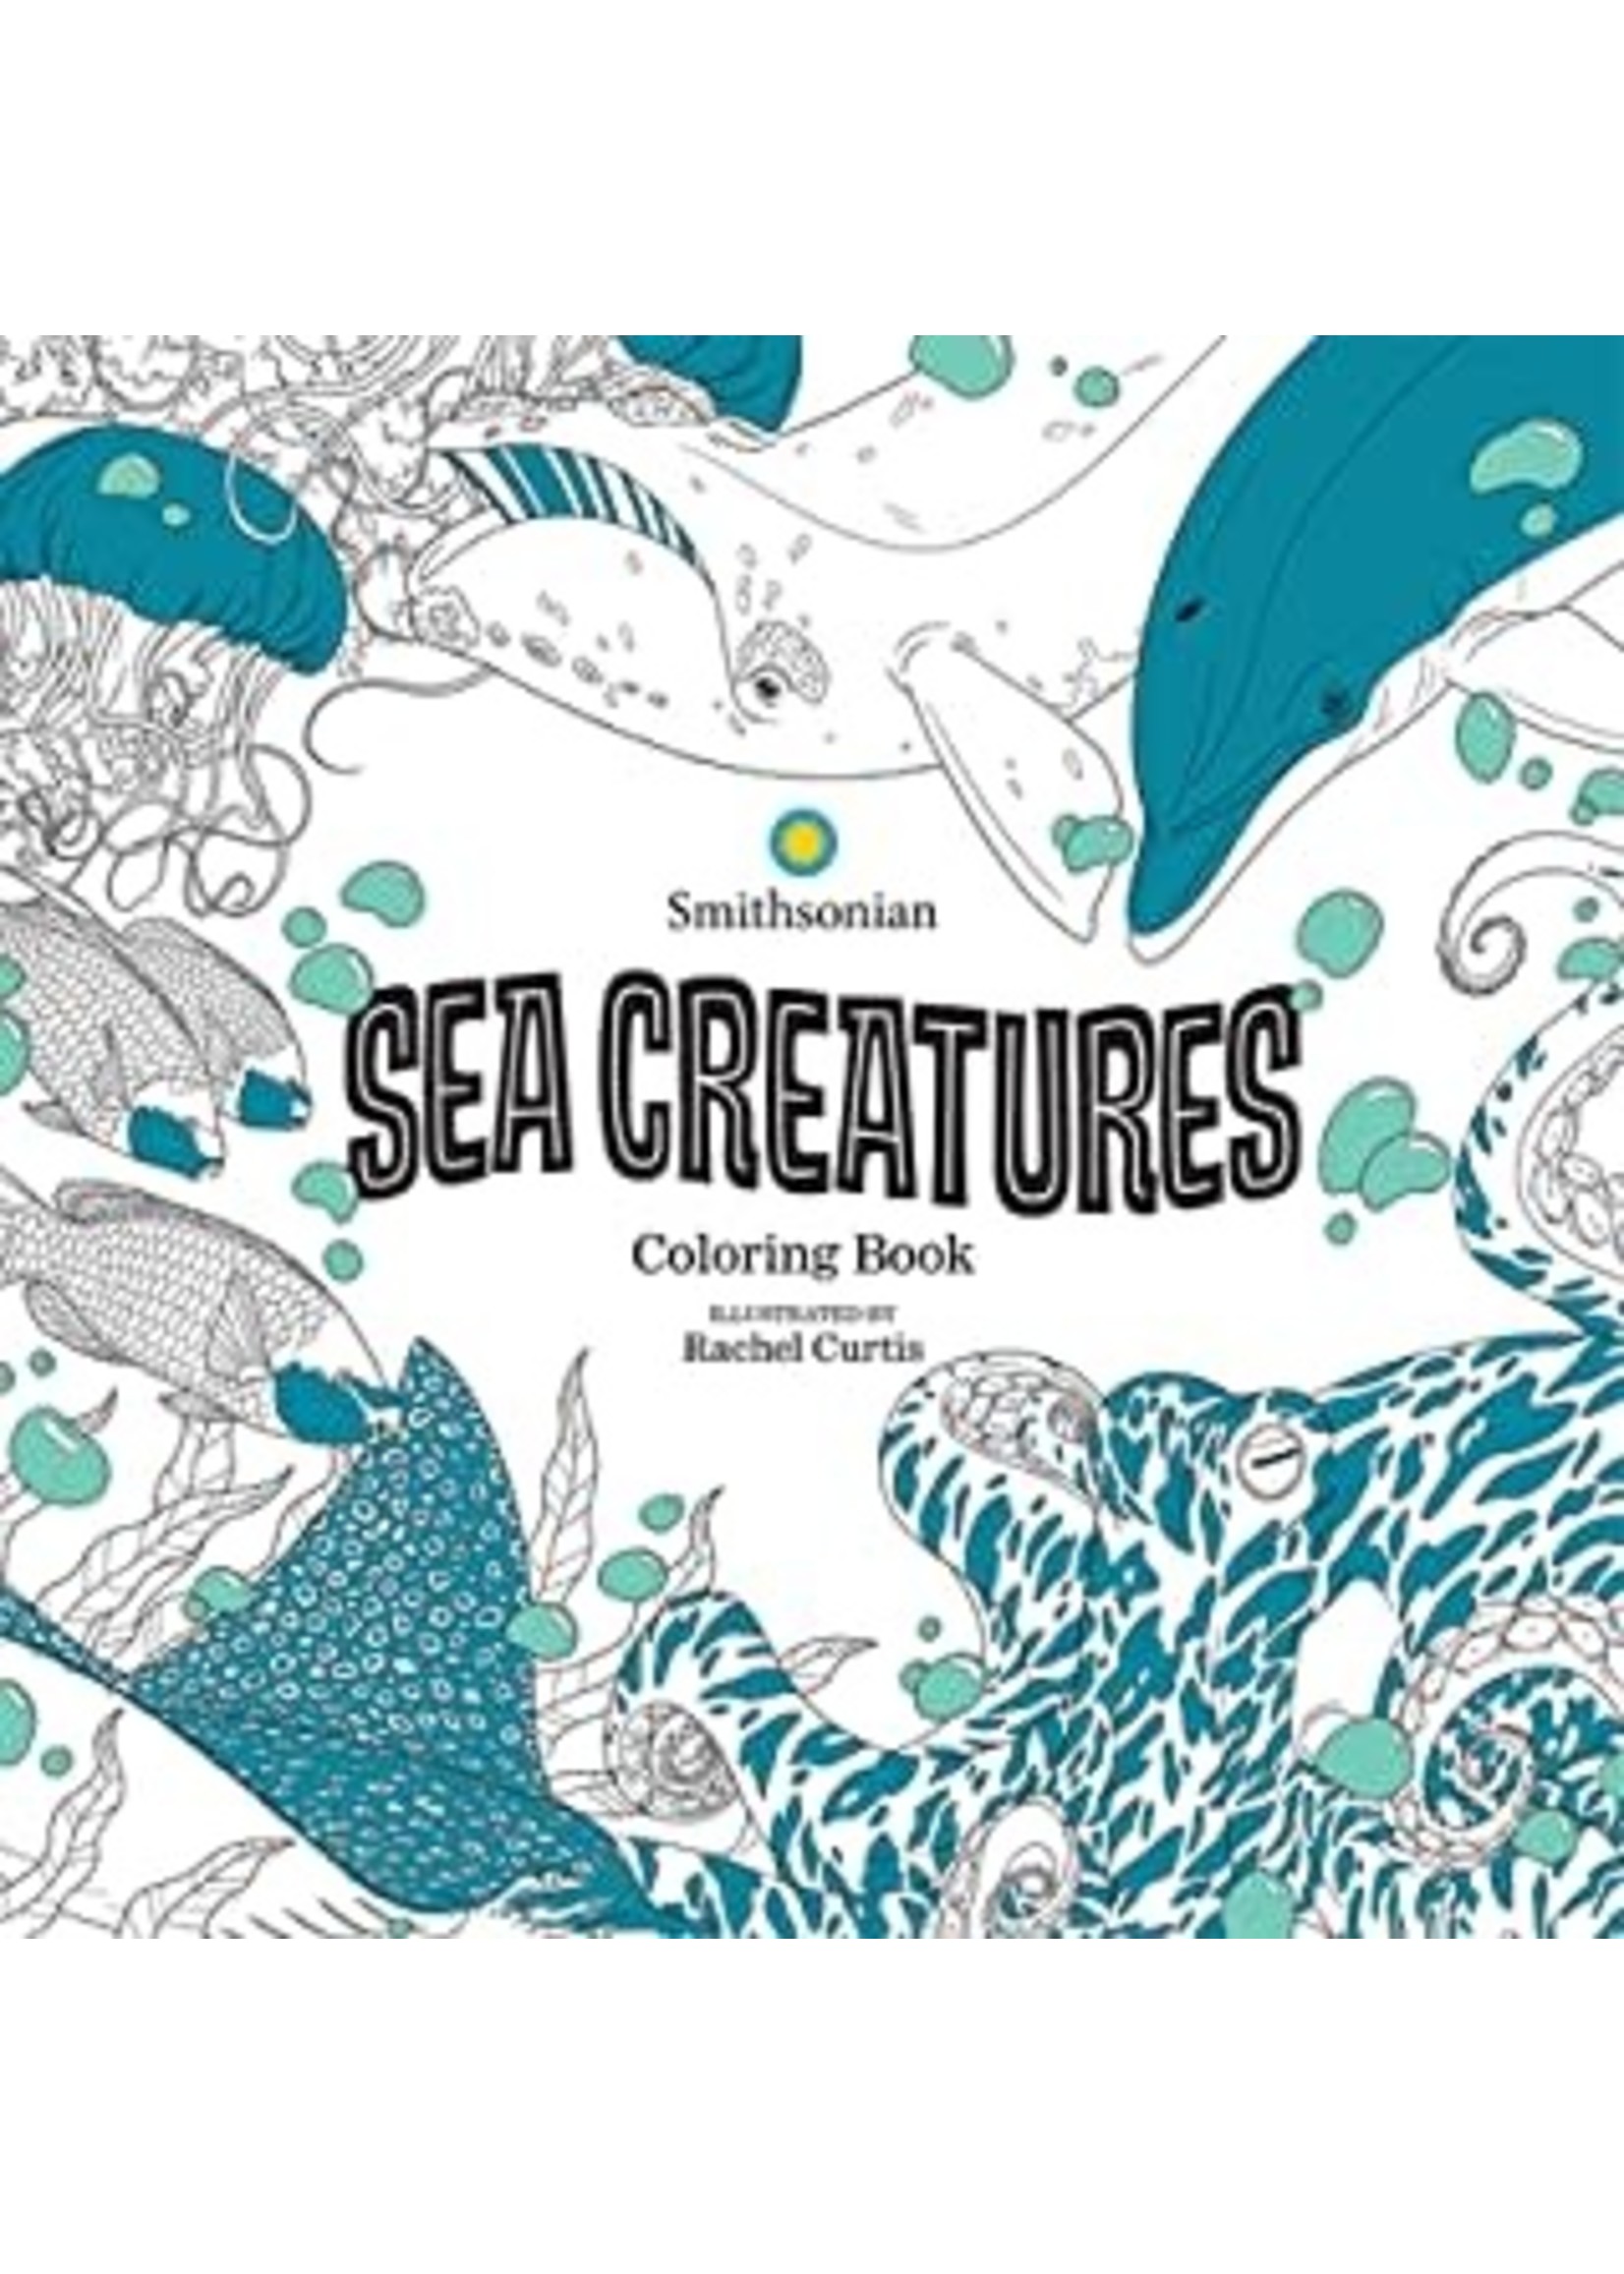 Sea Creatures: A Smithsonian Coloring Book by Smithsonian Institution, Rachel Curtis